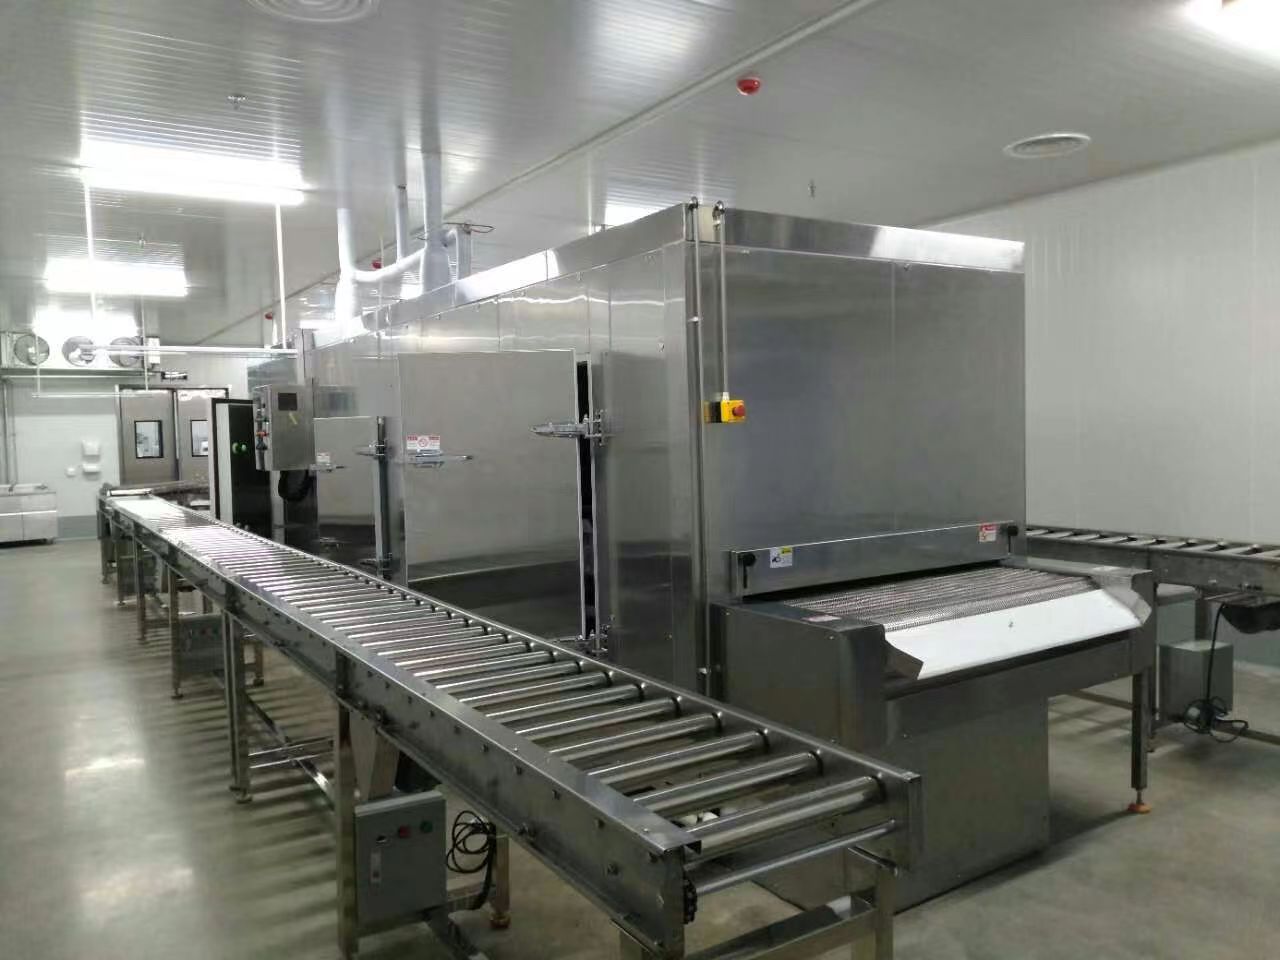 China First Cold Chain IQF Tunnel Freezer FSW400 Type with Freon Refrigerations System for All Kinds of Frozen Food